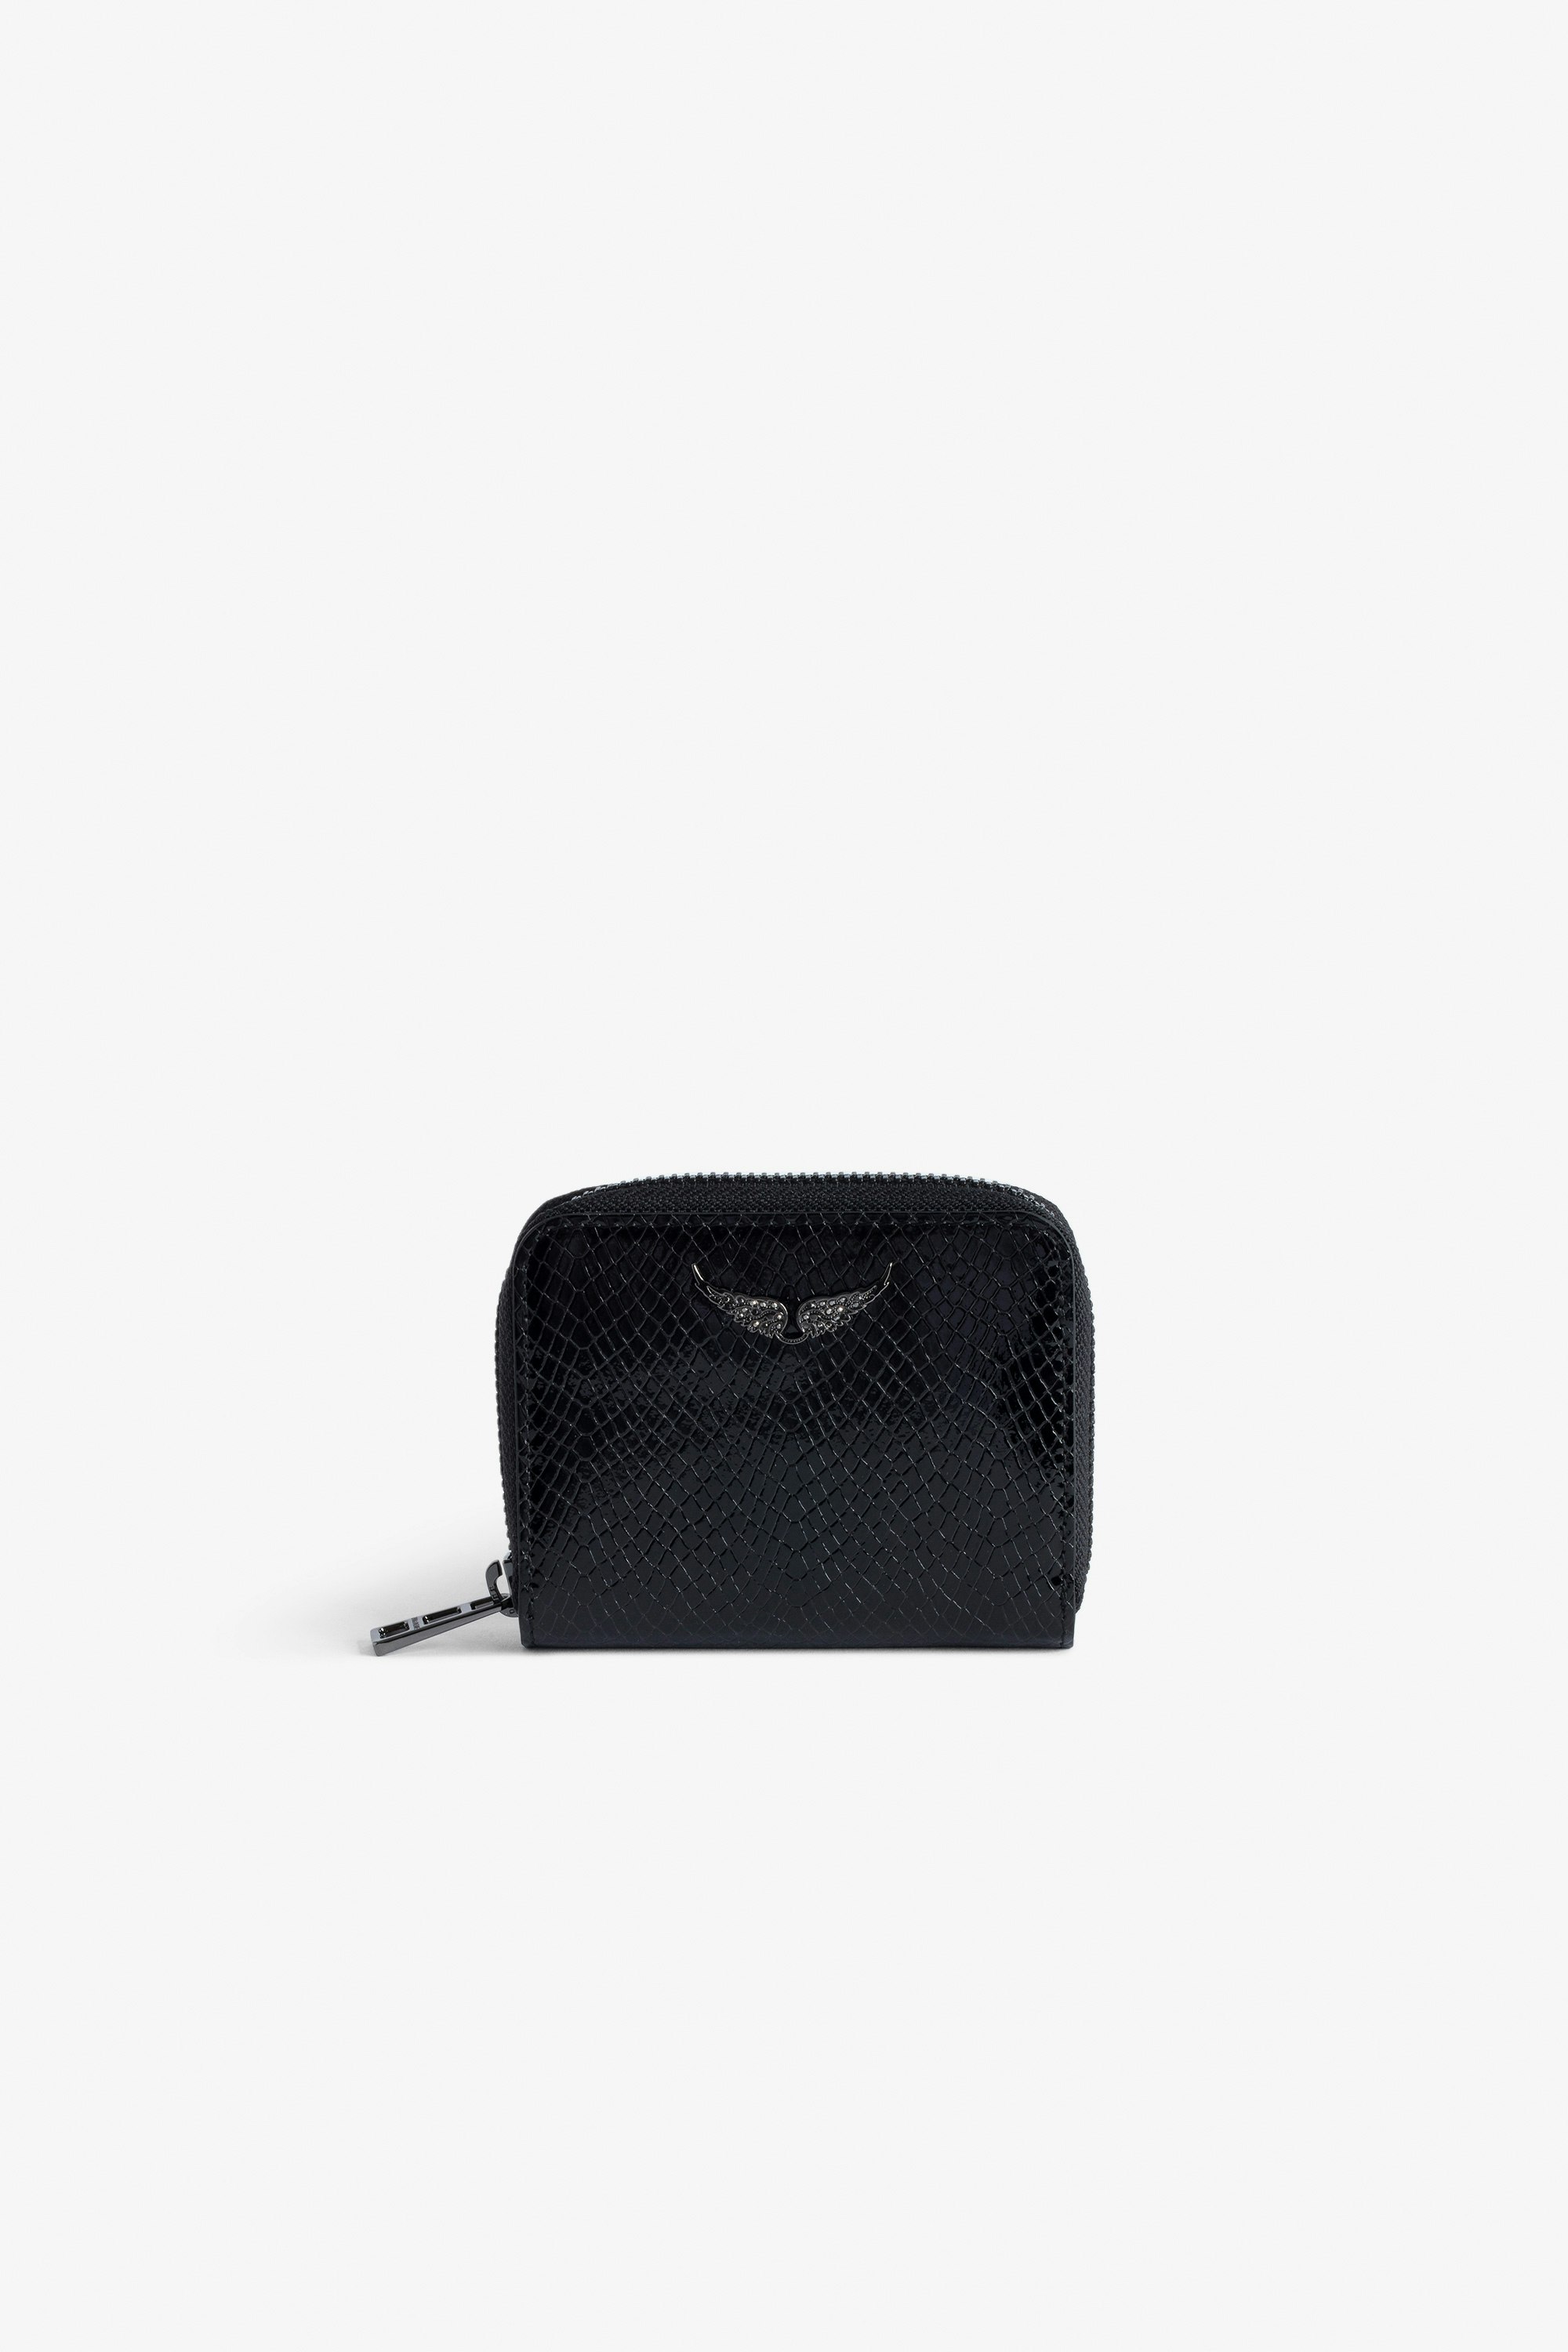 Mini ZV Embossed Coin Purse - Women’s black python-effect patent leather wallet with diamanté wings charm.